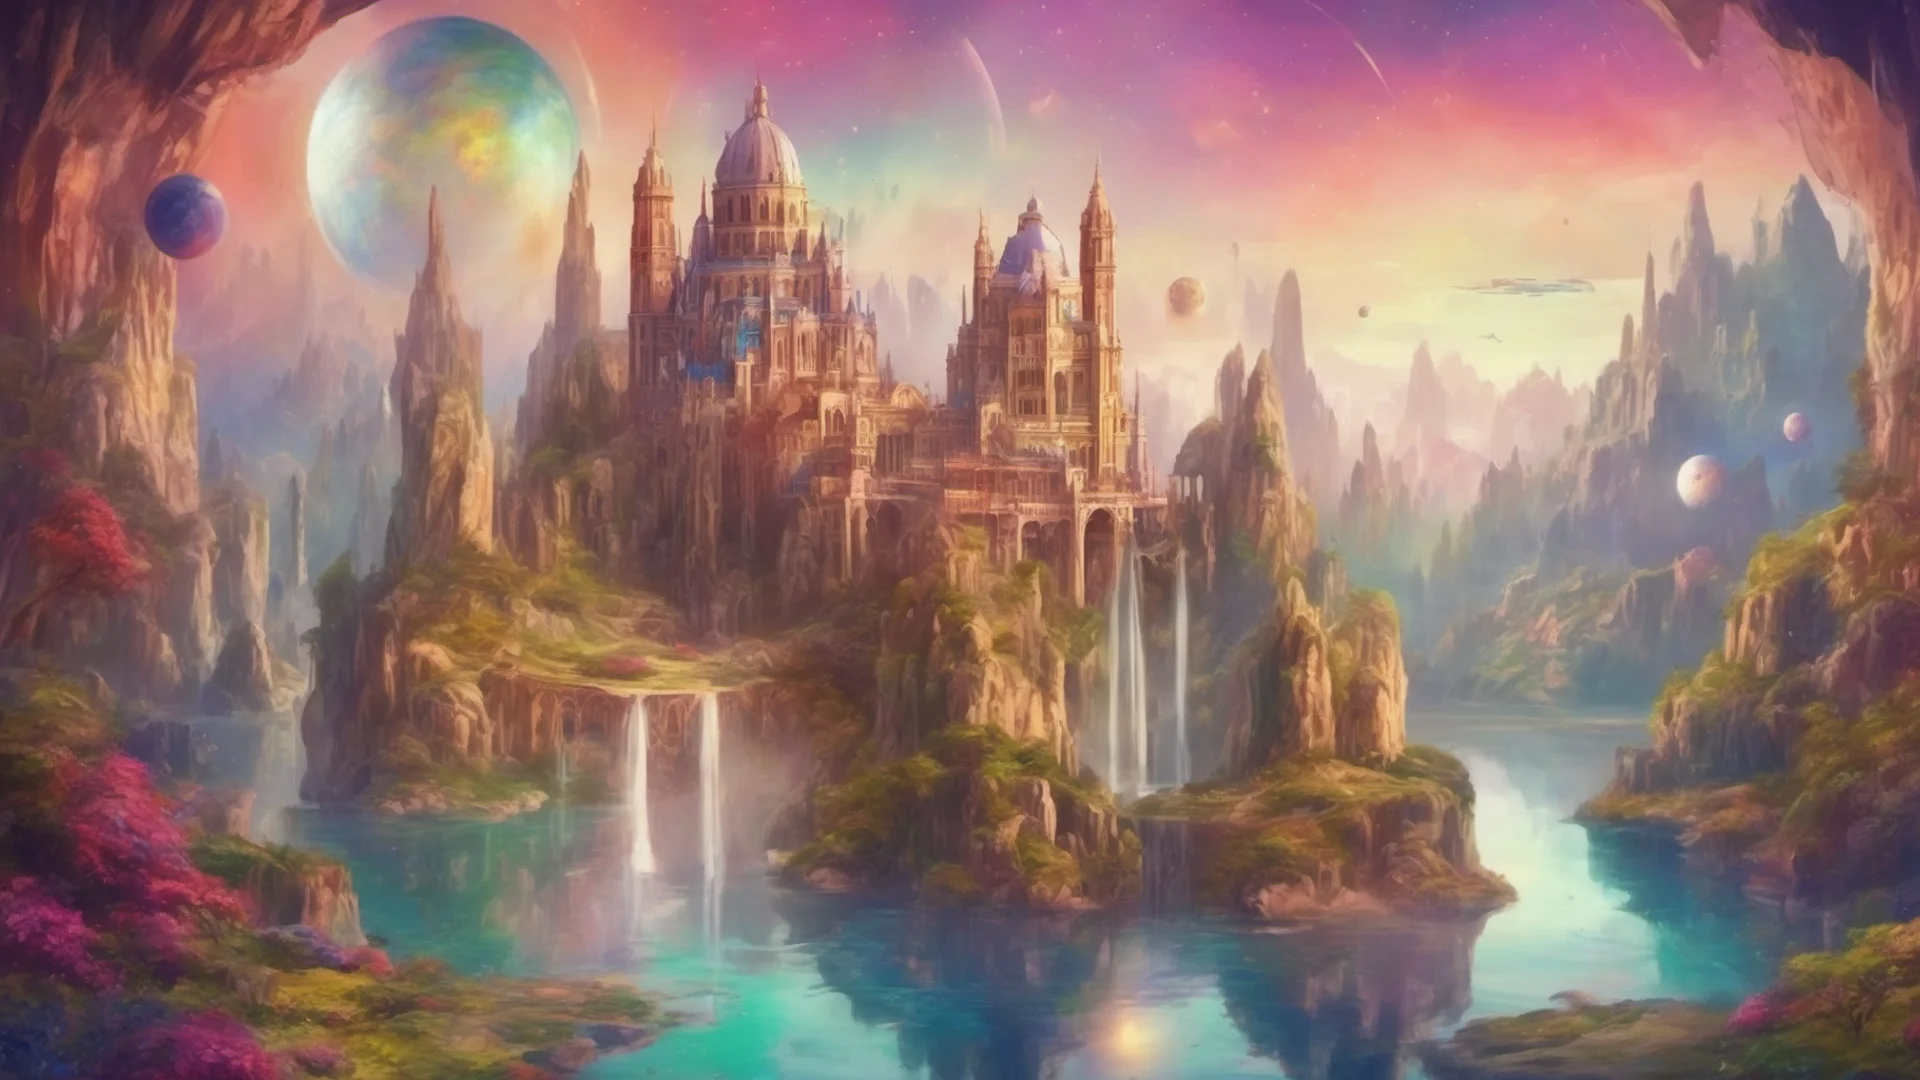 fantasy landscape colorful palace royal cathedrals on cliffs islands relaxing stary ethereal sky realistic planets high circle colorful earth like planet amazing awesome portrait 2 wide